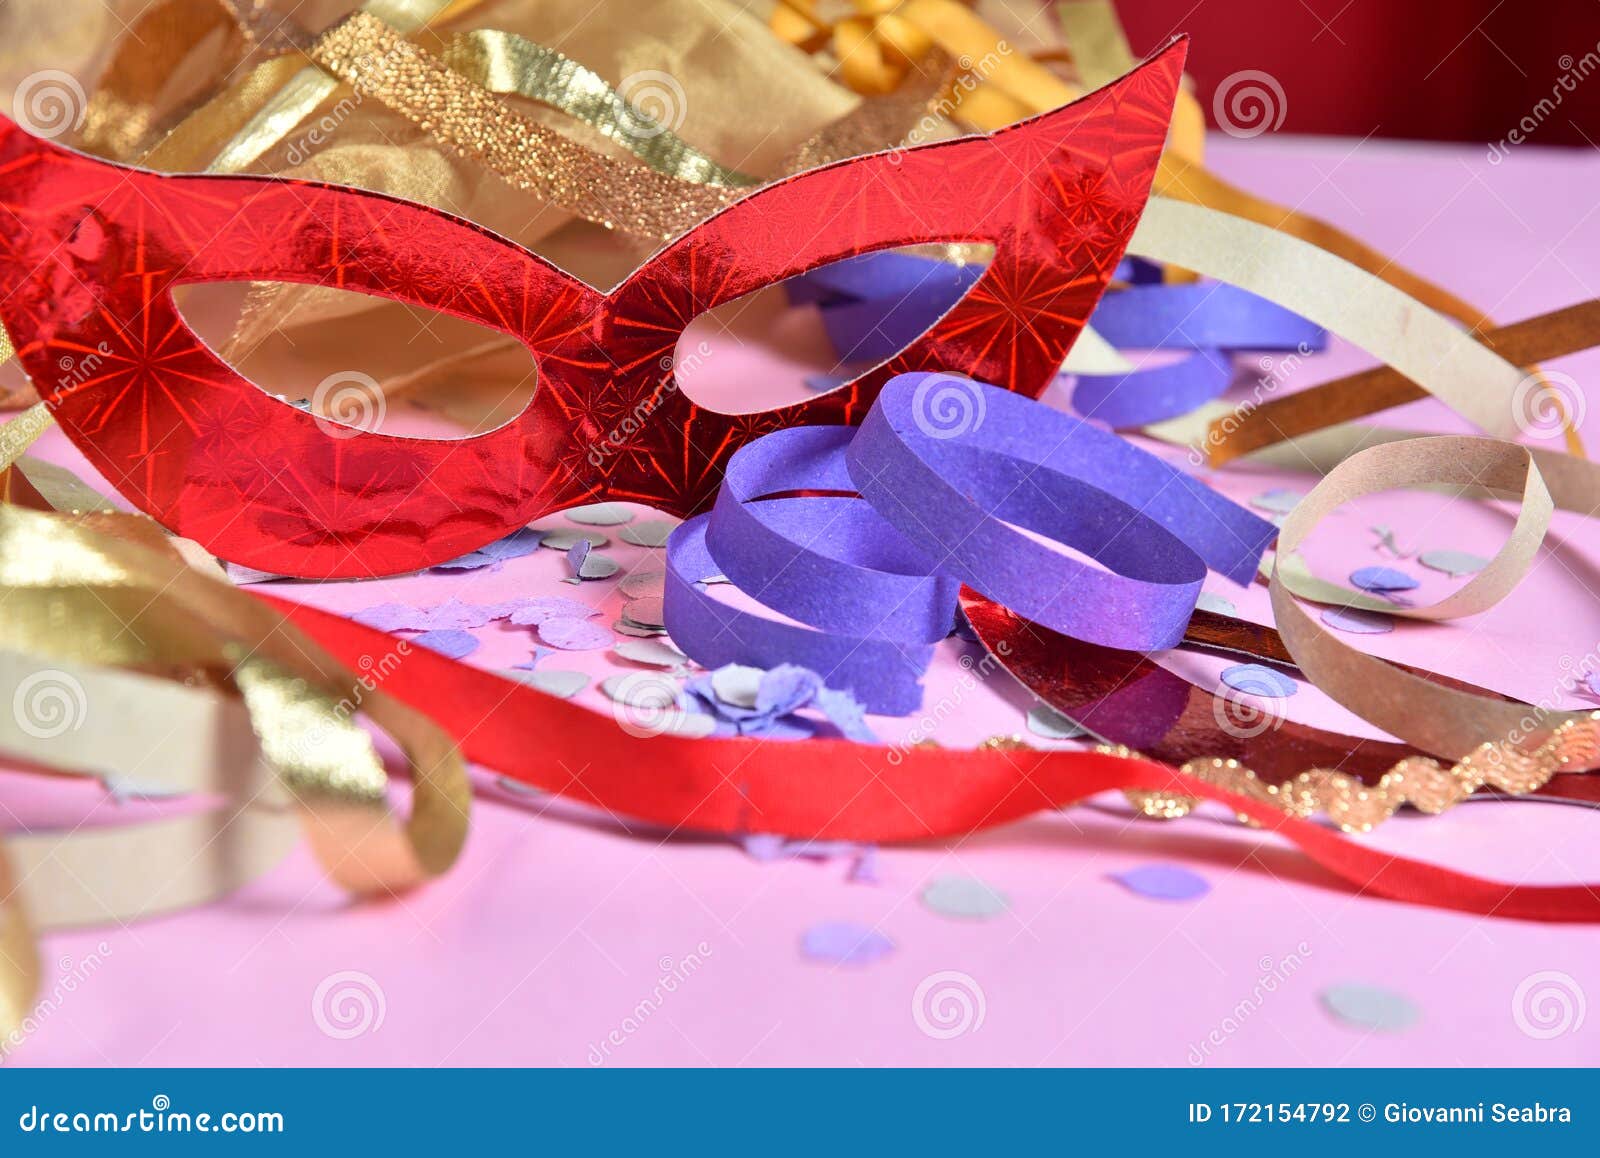 red carnival costume mask on colorful confetti necklace flowers and streamers with space for text